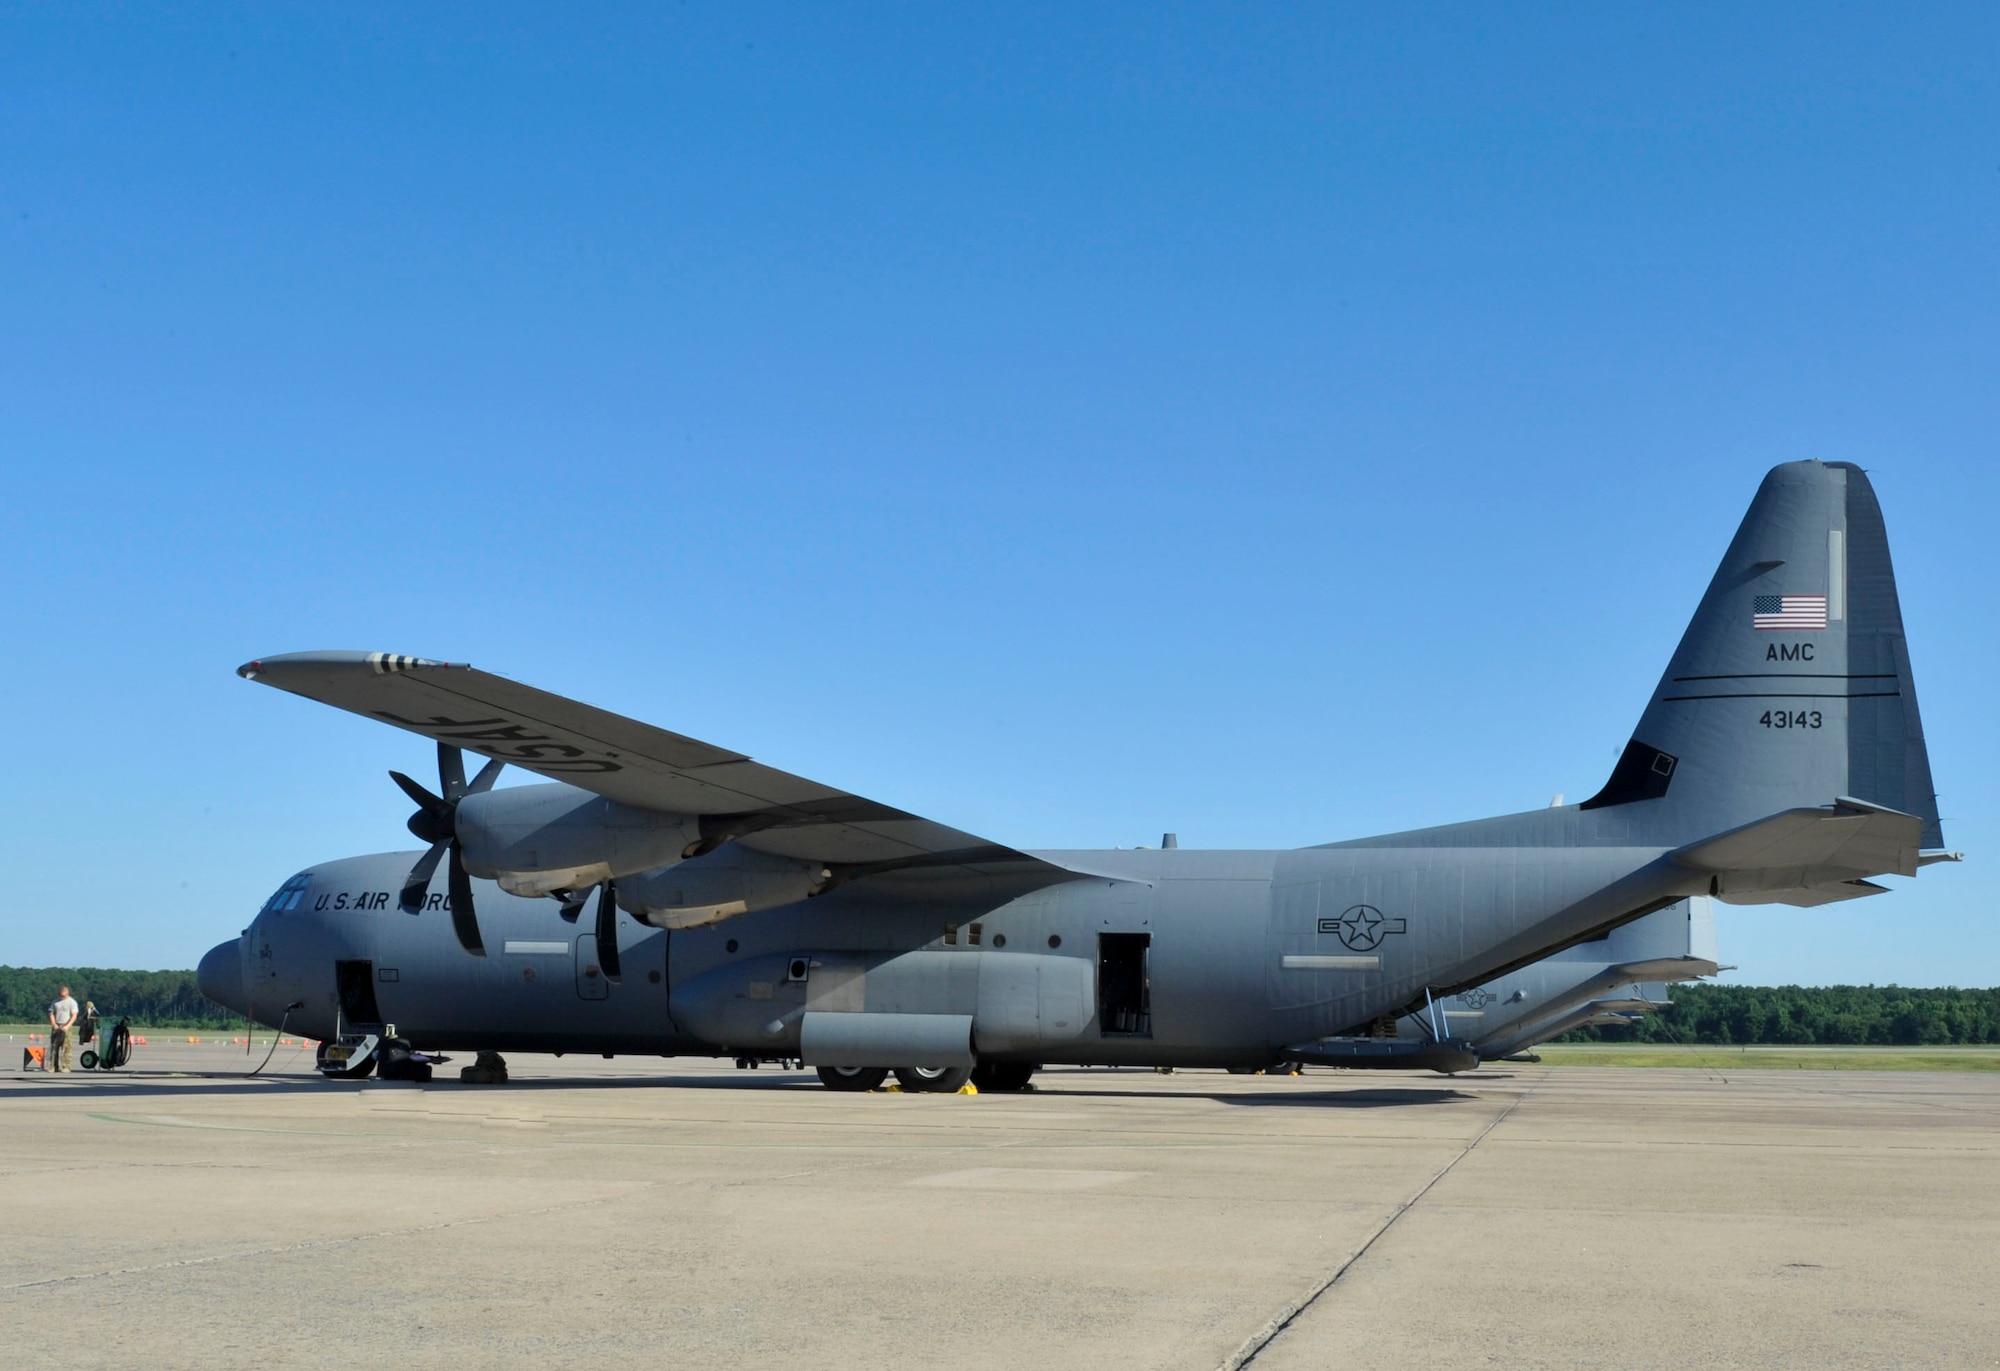 A C-130J parked on the flightline is prepared for an iron swap mission June 9, 2015, at Little Rock Air Force Base, Ark. Iron swap missions can take up to 10 days or more to complete. (U.S. Air Force photo by Senior Airman Stephanie Serrano)